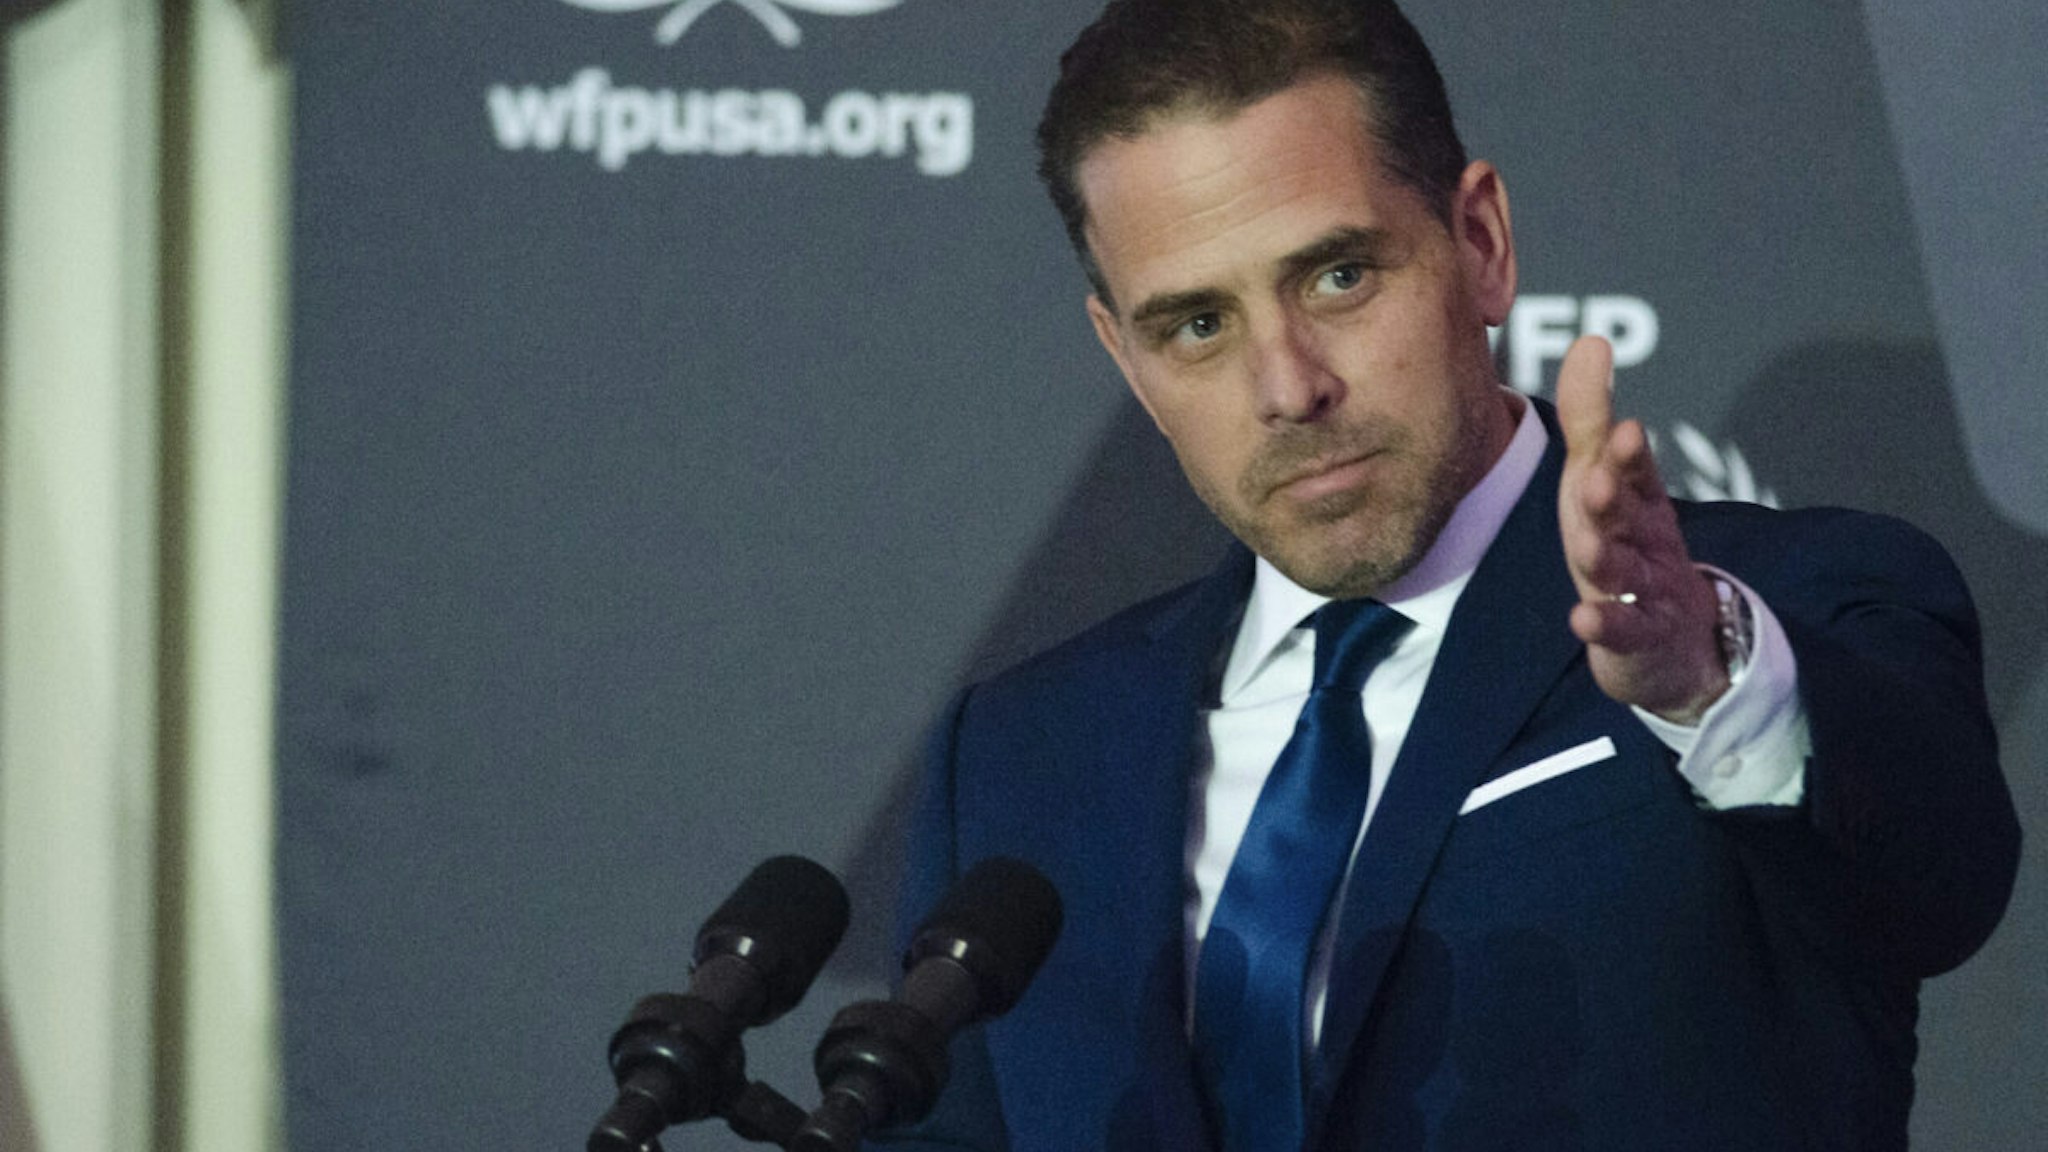 Hunter Biden speaks during the World Food Program USA's 2016 McGovern-Dole Leadership Award Ceremony at the Organization of American States on April 12, 2016 in Washington, DC